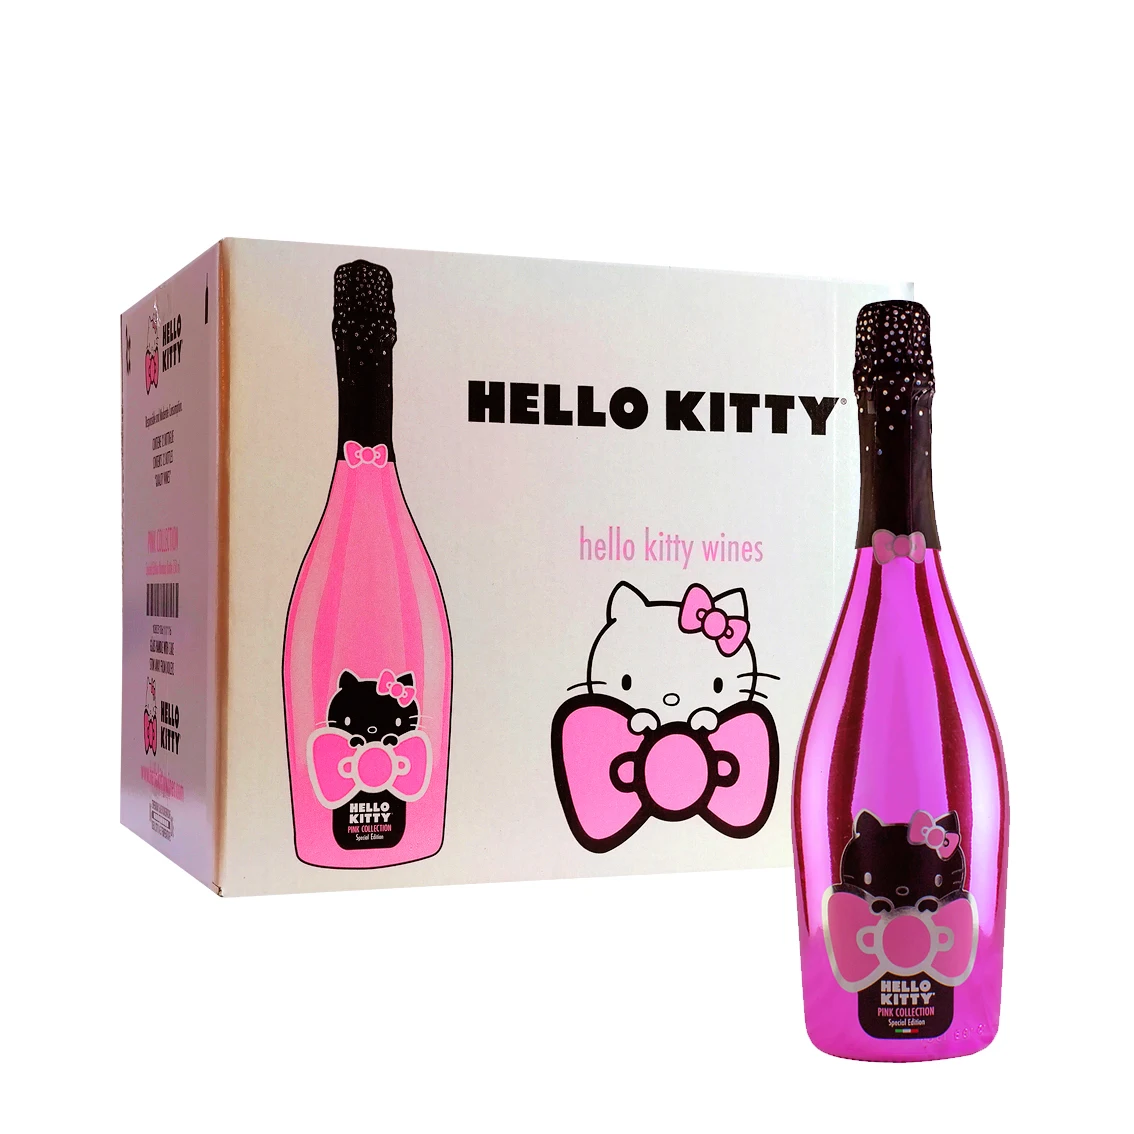 Hello Kitty SPECIAL EDITION Sparkling Rose 750 ml